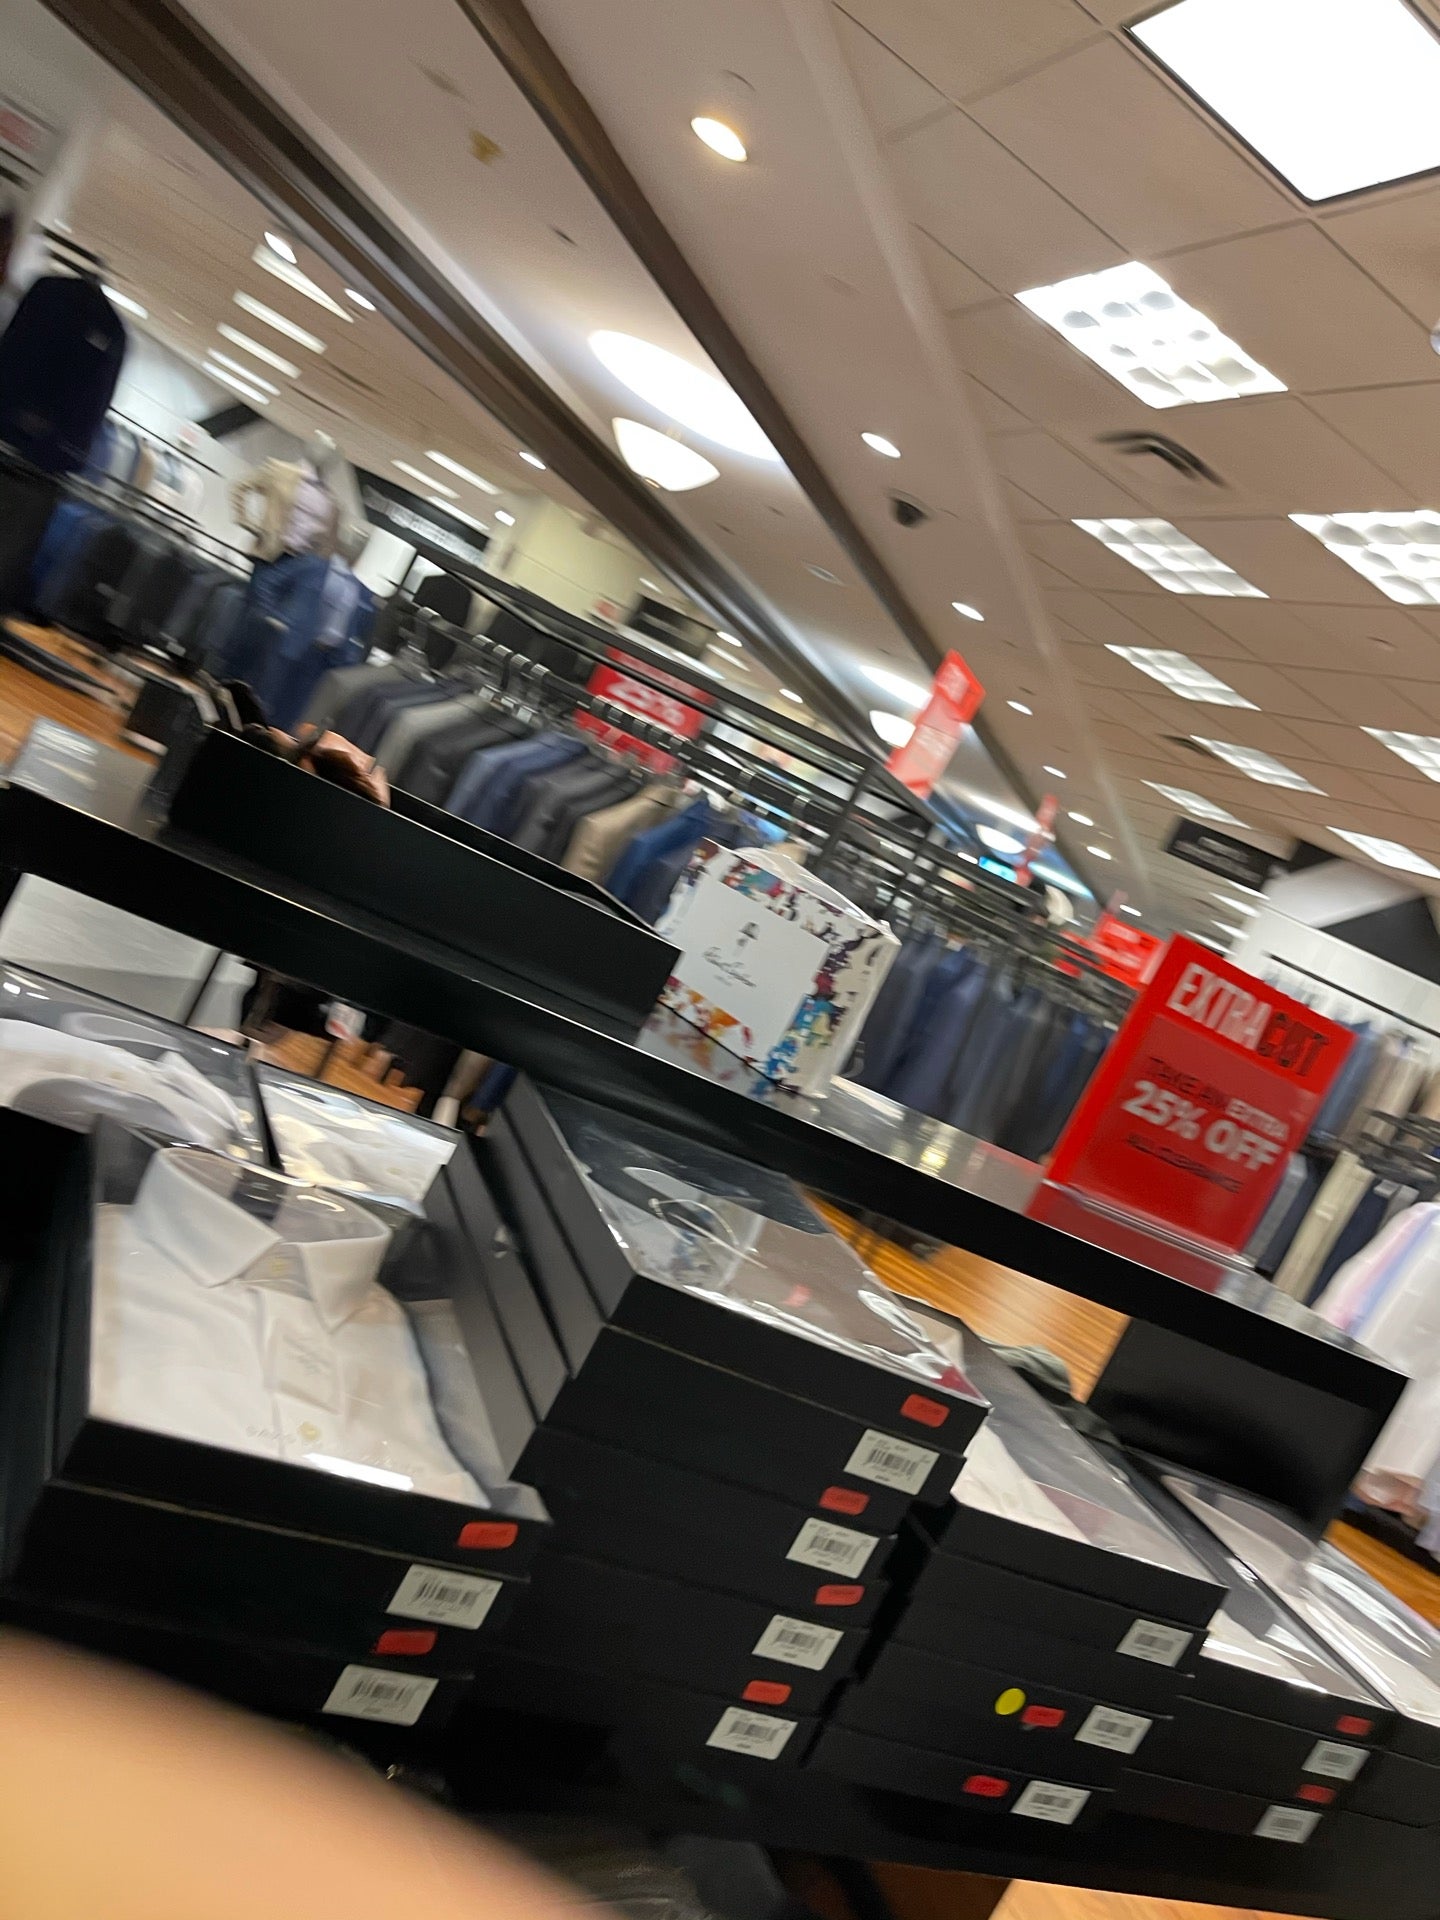 Saks OFF 5TH leaving Bay Plaza location after 2-year stint – Bronx Times